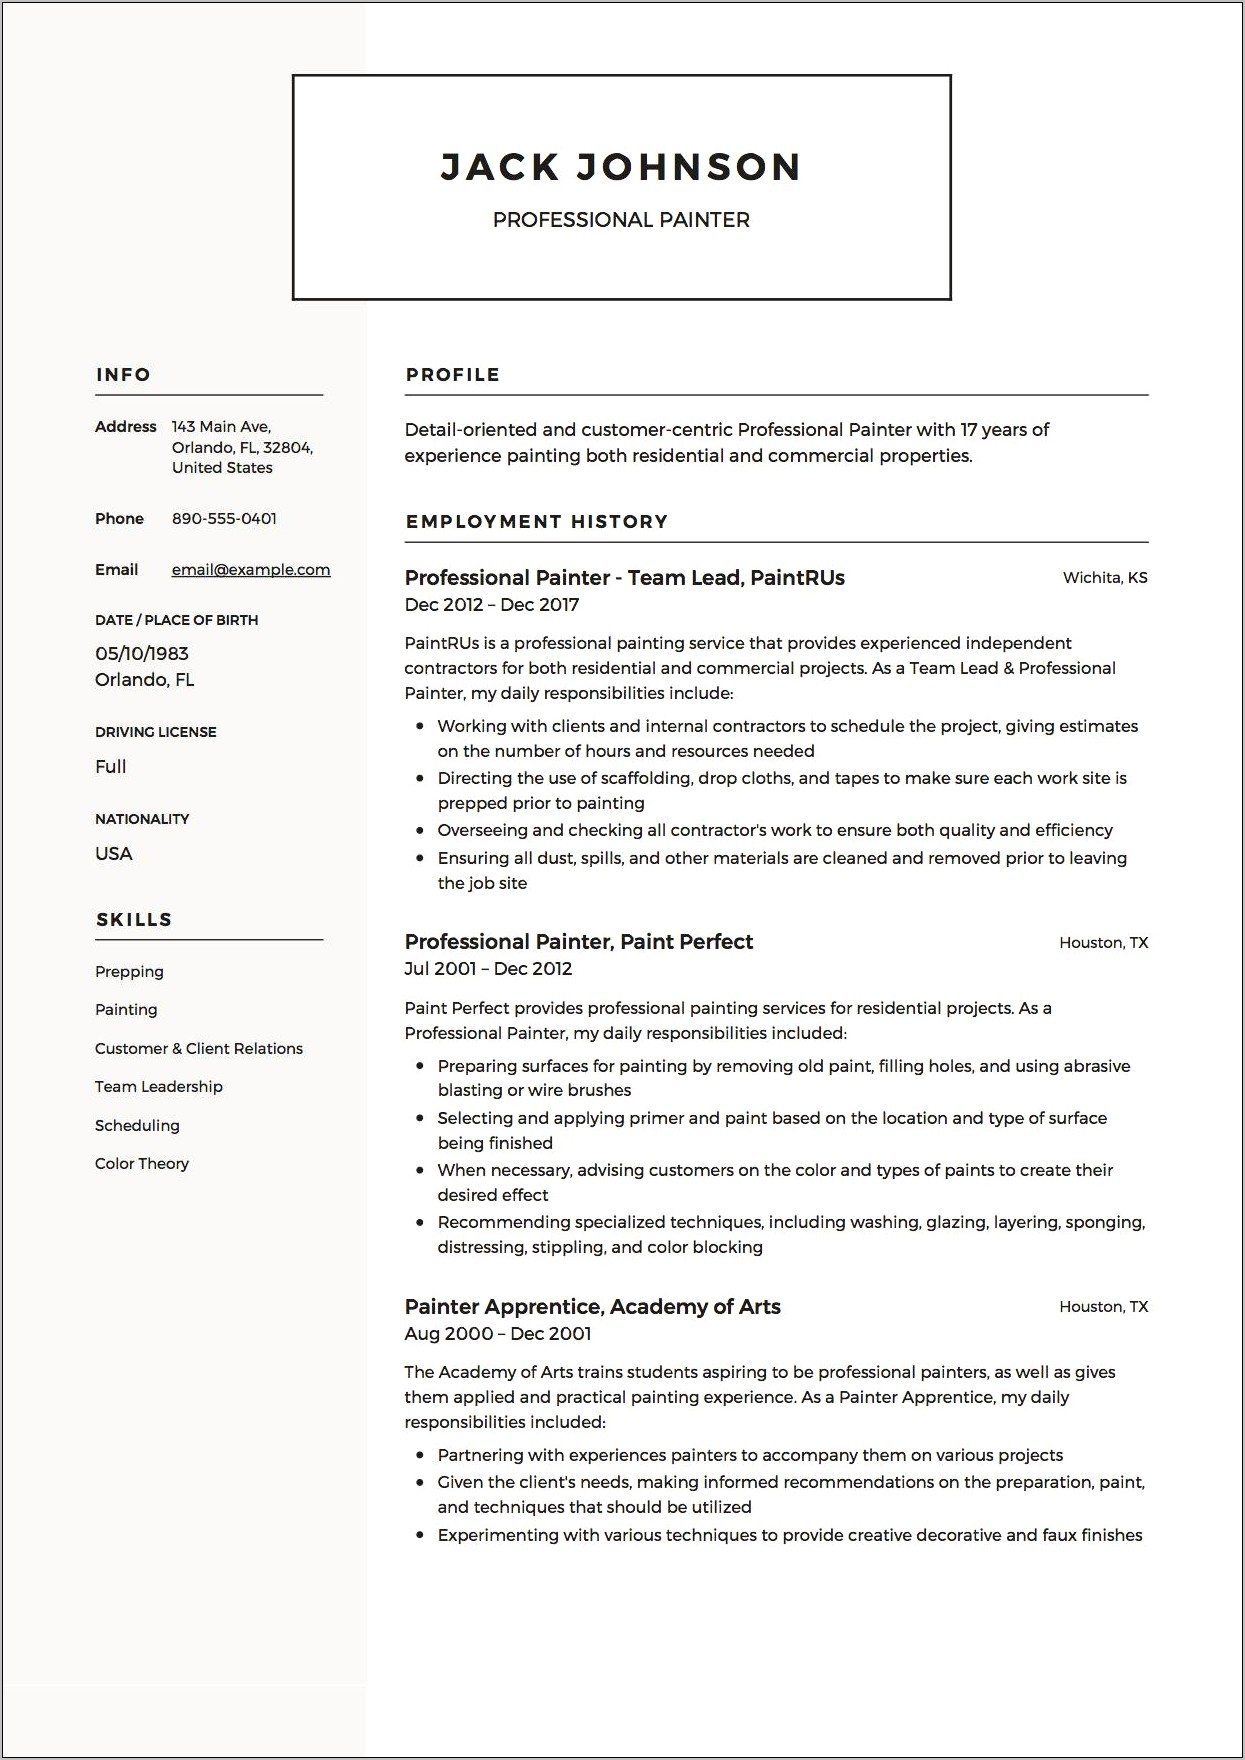 Resumes Sample For House Painter